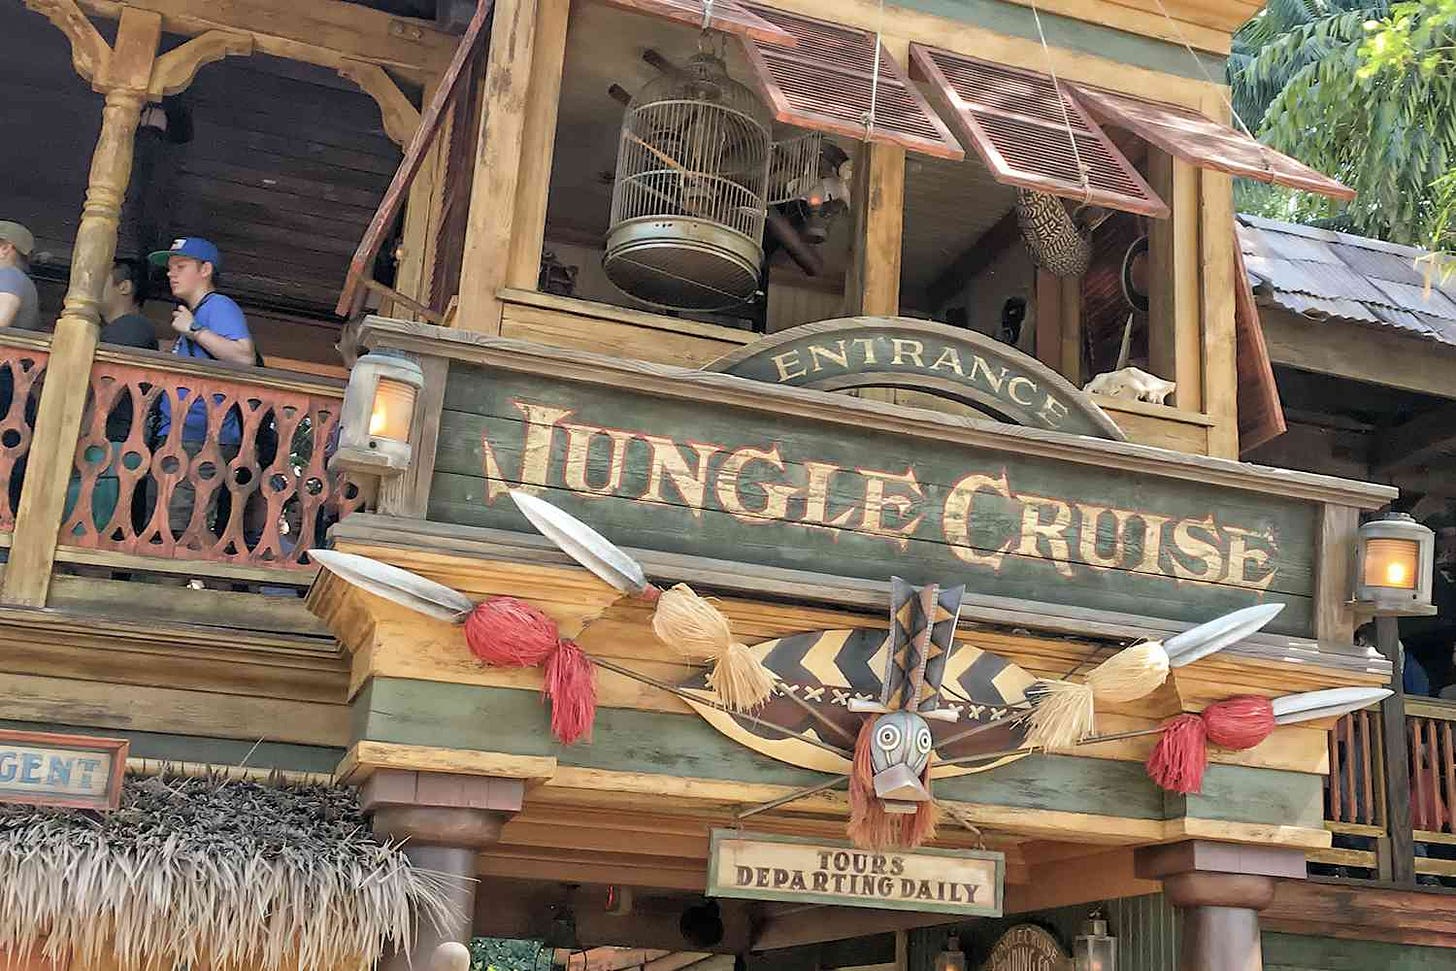 Jungle Cruise at Disneyland: Things You Need to Know